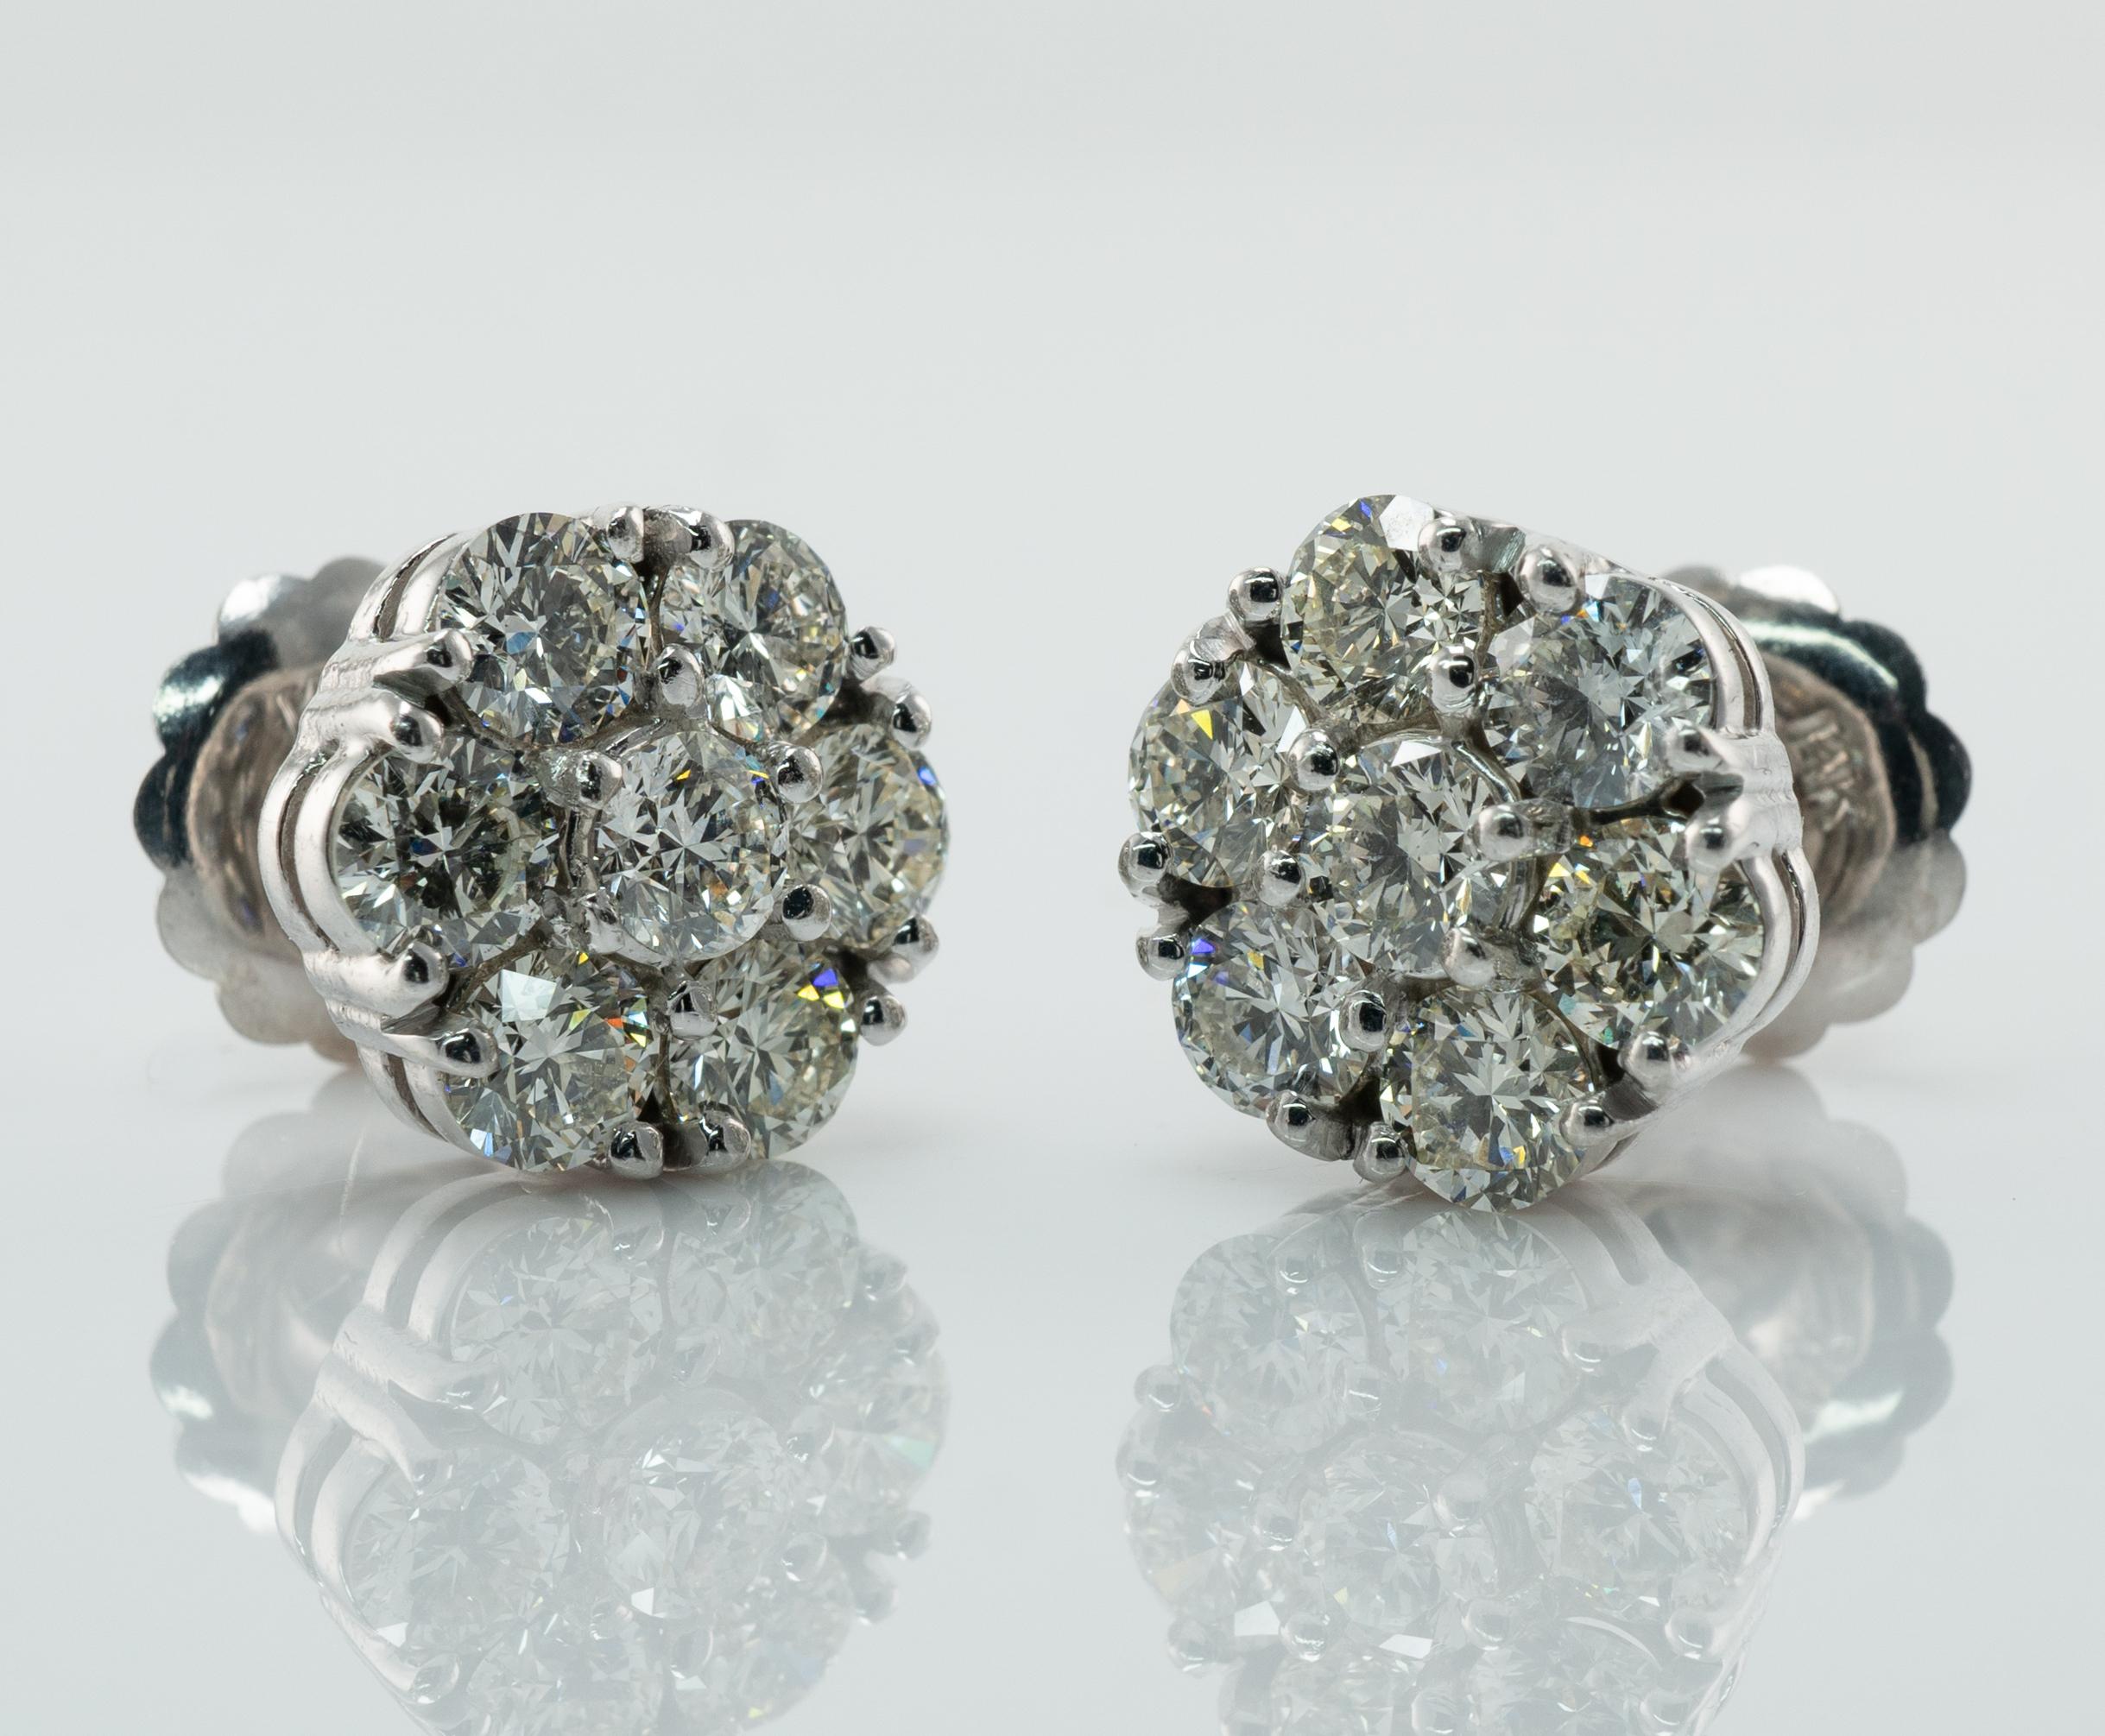 Diamond Earrings Studs 14K White Gold Cluster  4.20 TDW

This pair of diamond cluster studs is crafted in solid 14K White Gold (tested and guaranteed). 
There are seven natural round brilliant cut diamonds totaling 4.20 carats for the pair.
 The